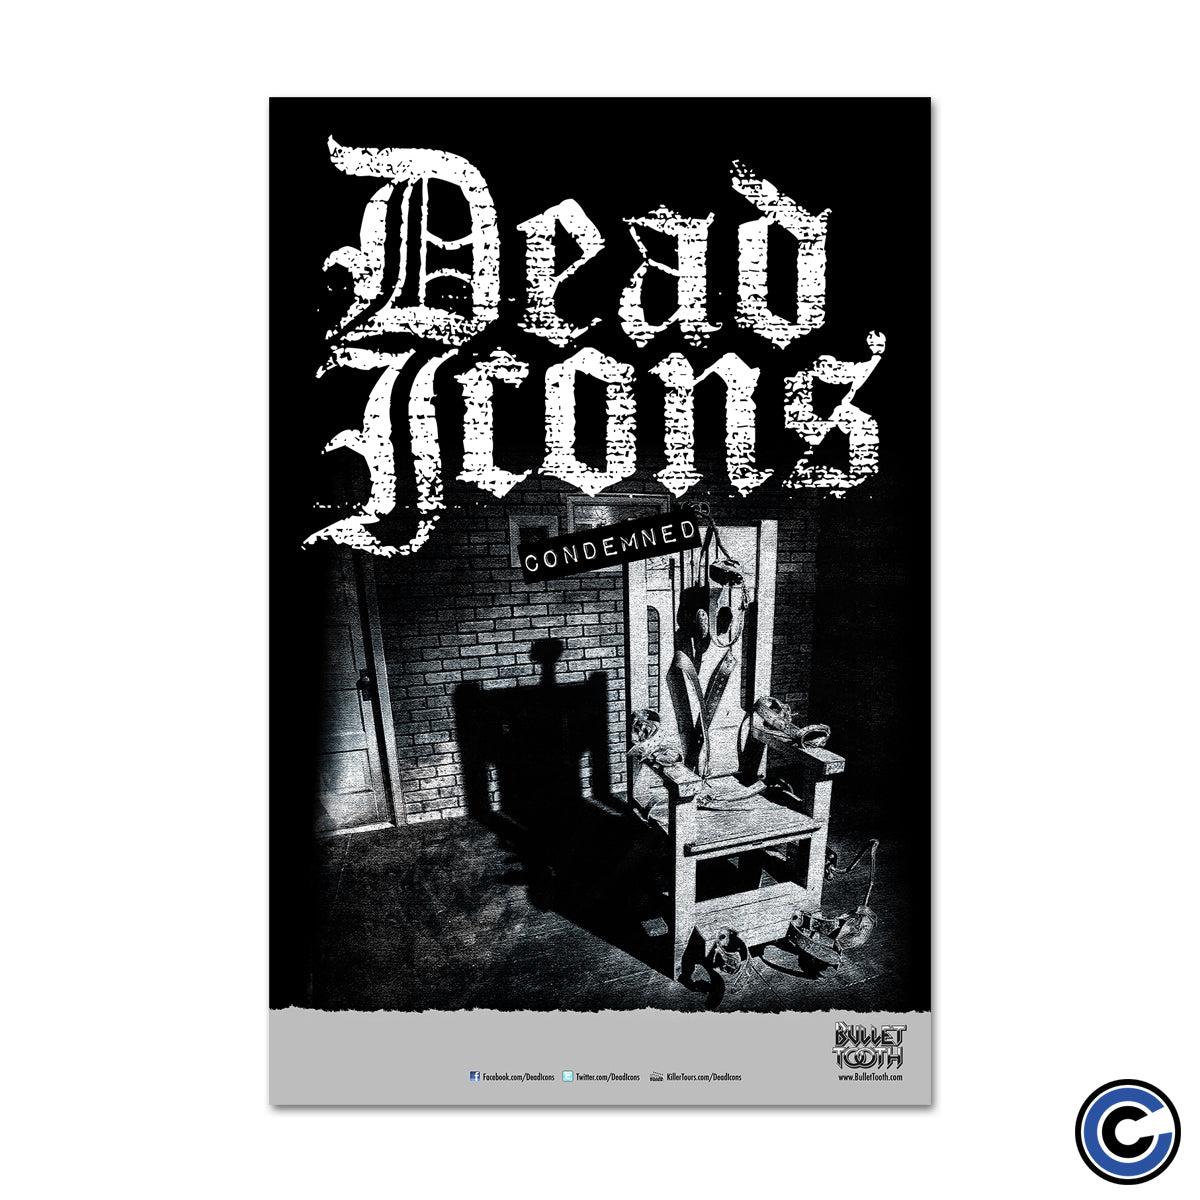 Dead Icons "Condemned" Poster